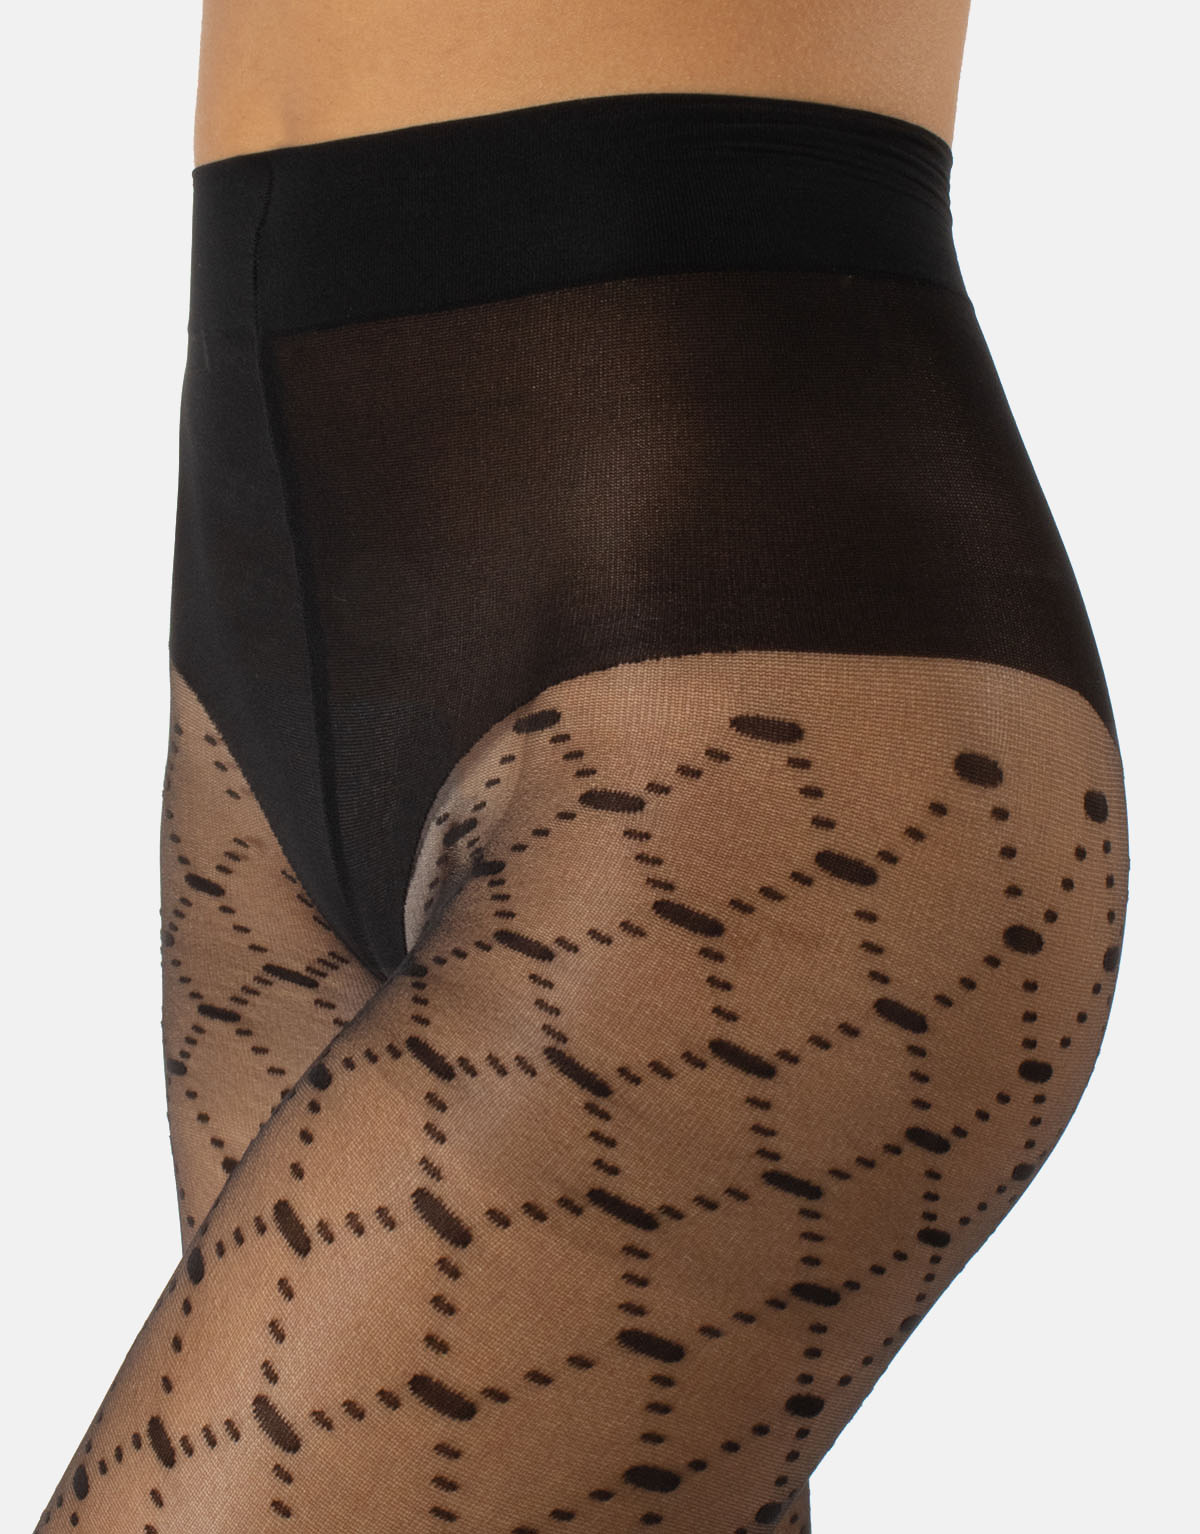 Calzitaly Argyle Tights Recycled Yarn - Sustainable eco friendly sheer black fashion tights with a woven spotted diamond pattern, opaque panty top.